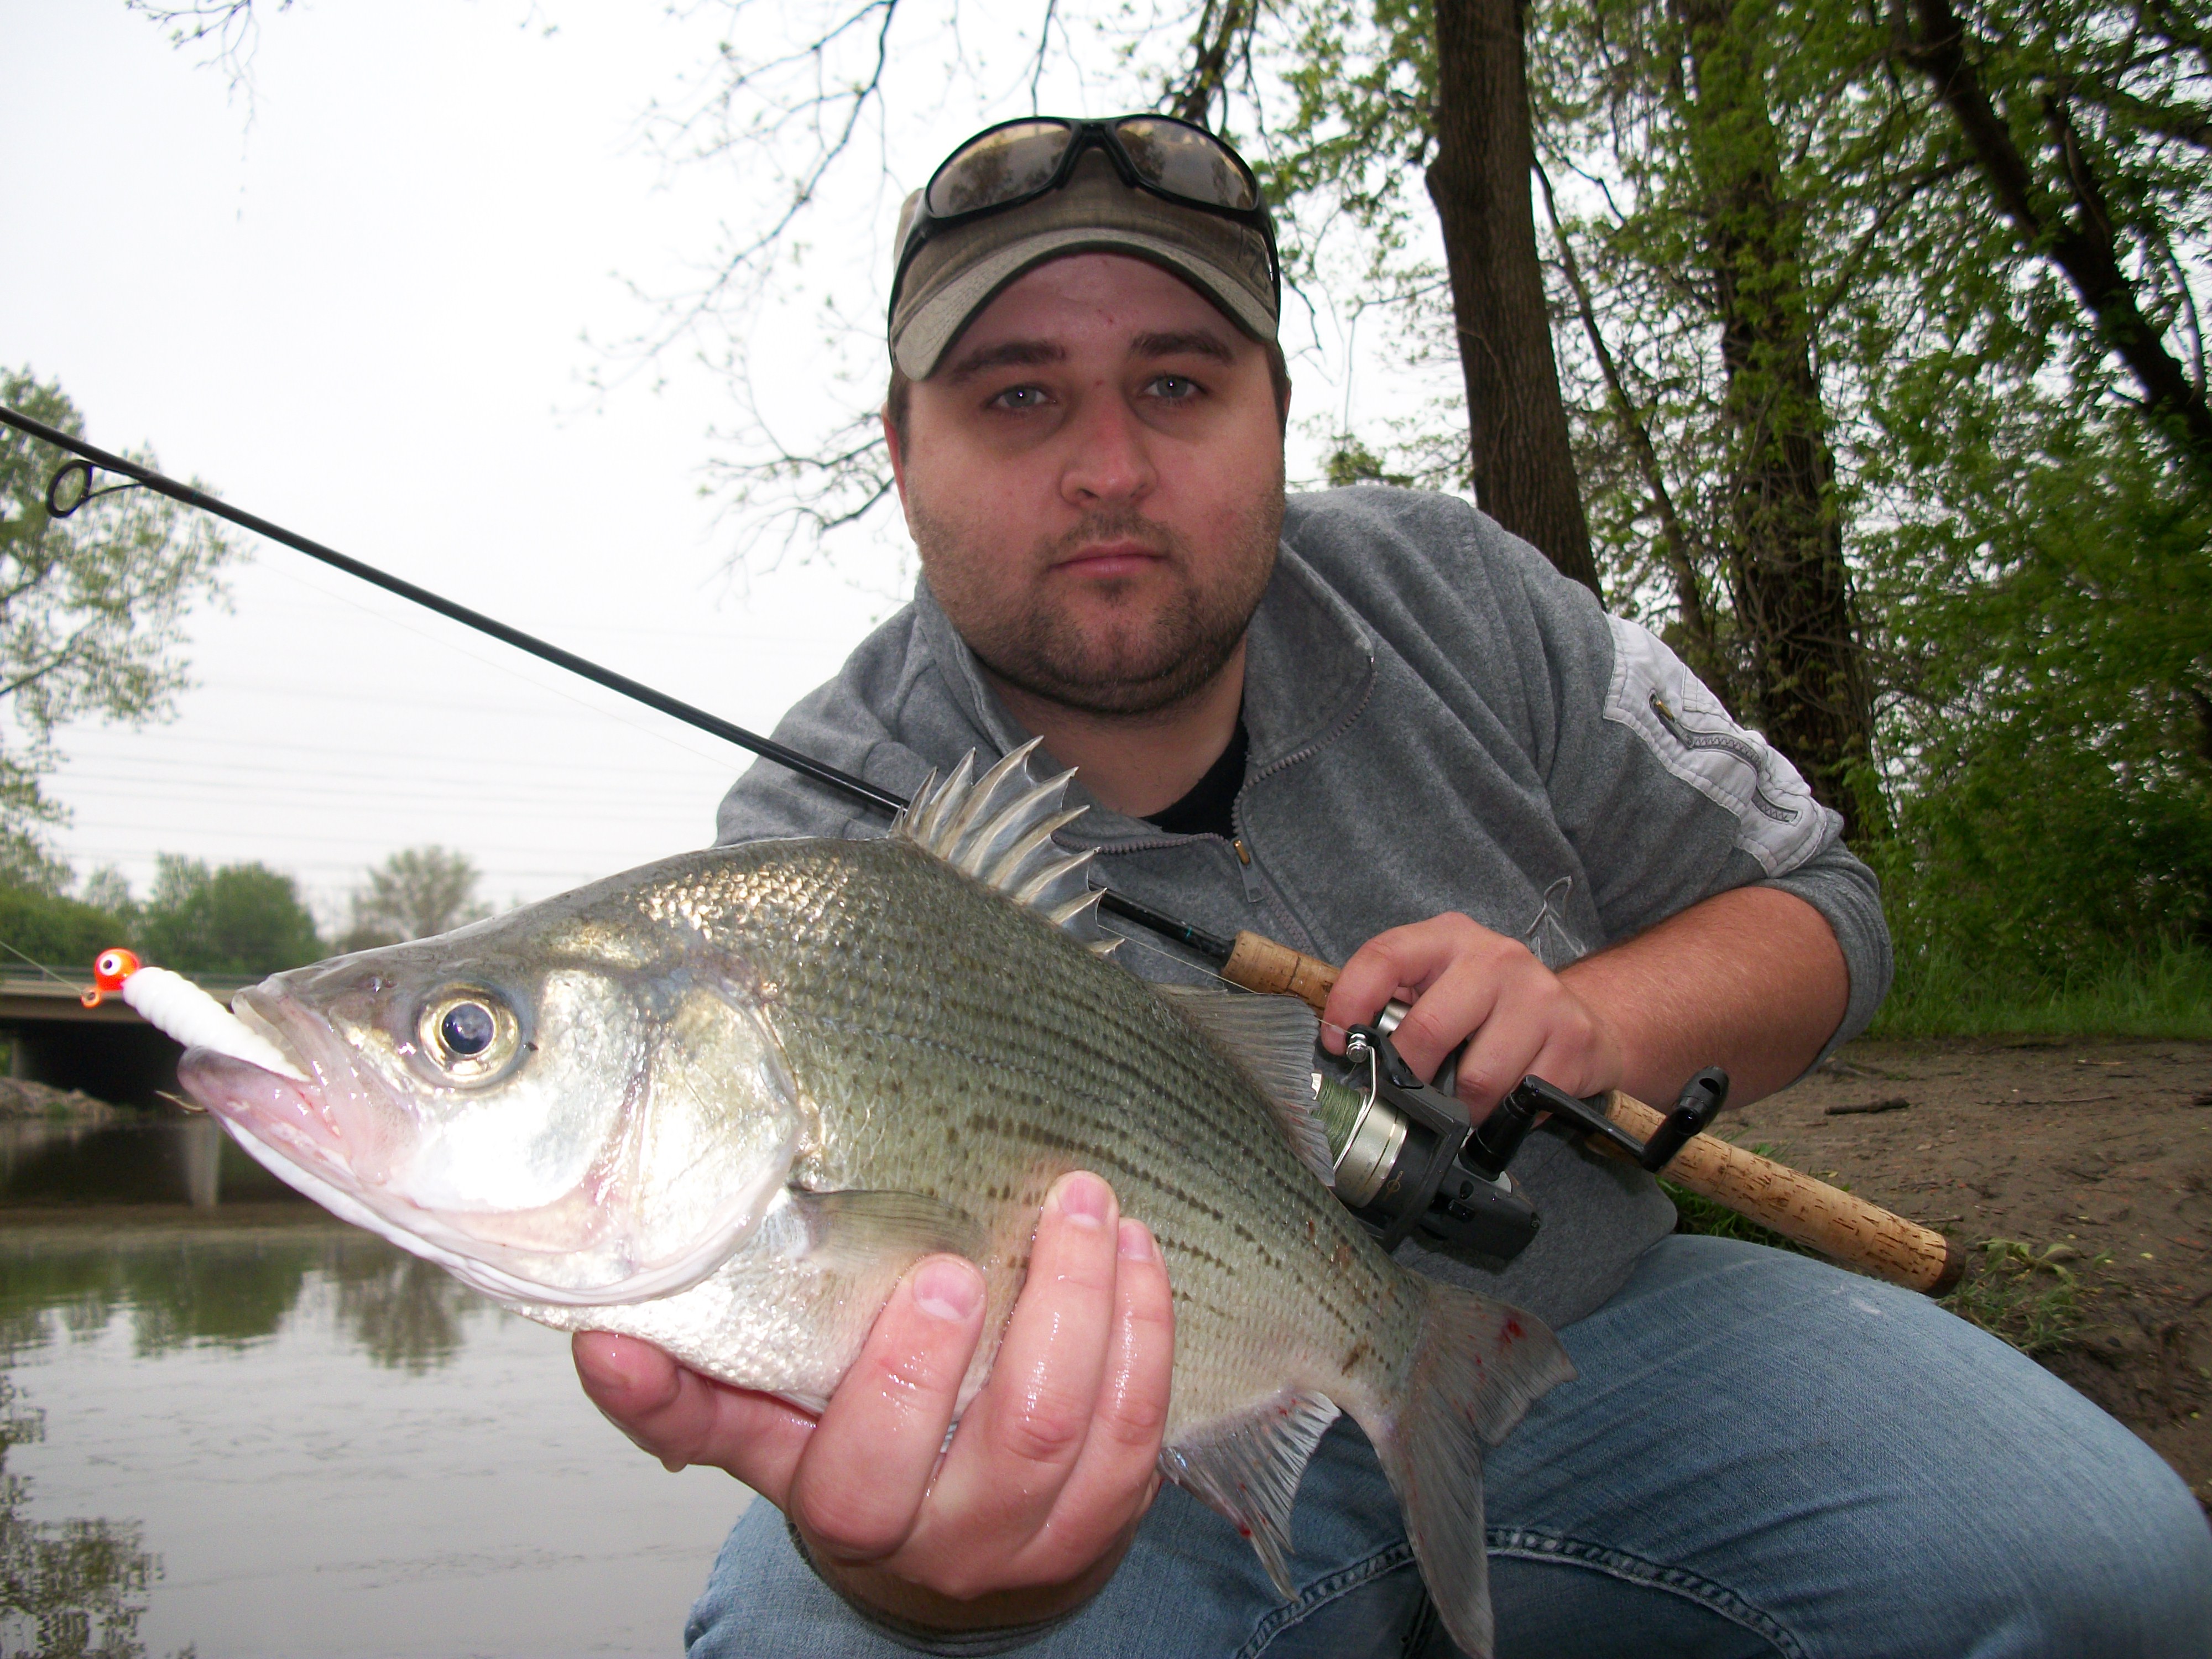 Best Lures For White Bass: Our Picks For White Bass Success - USAngler